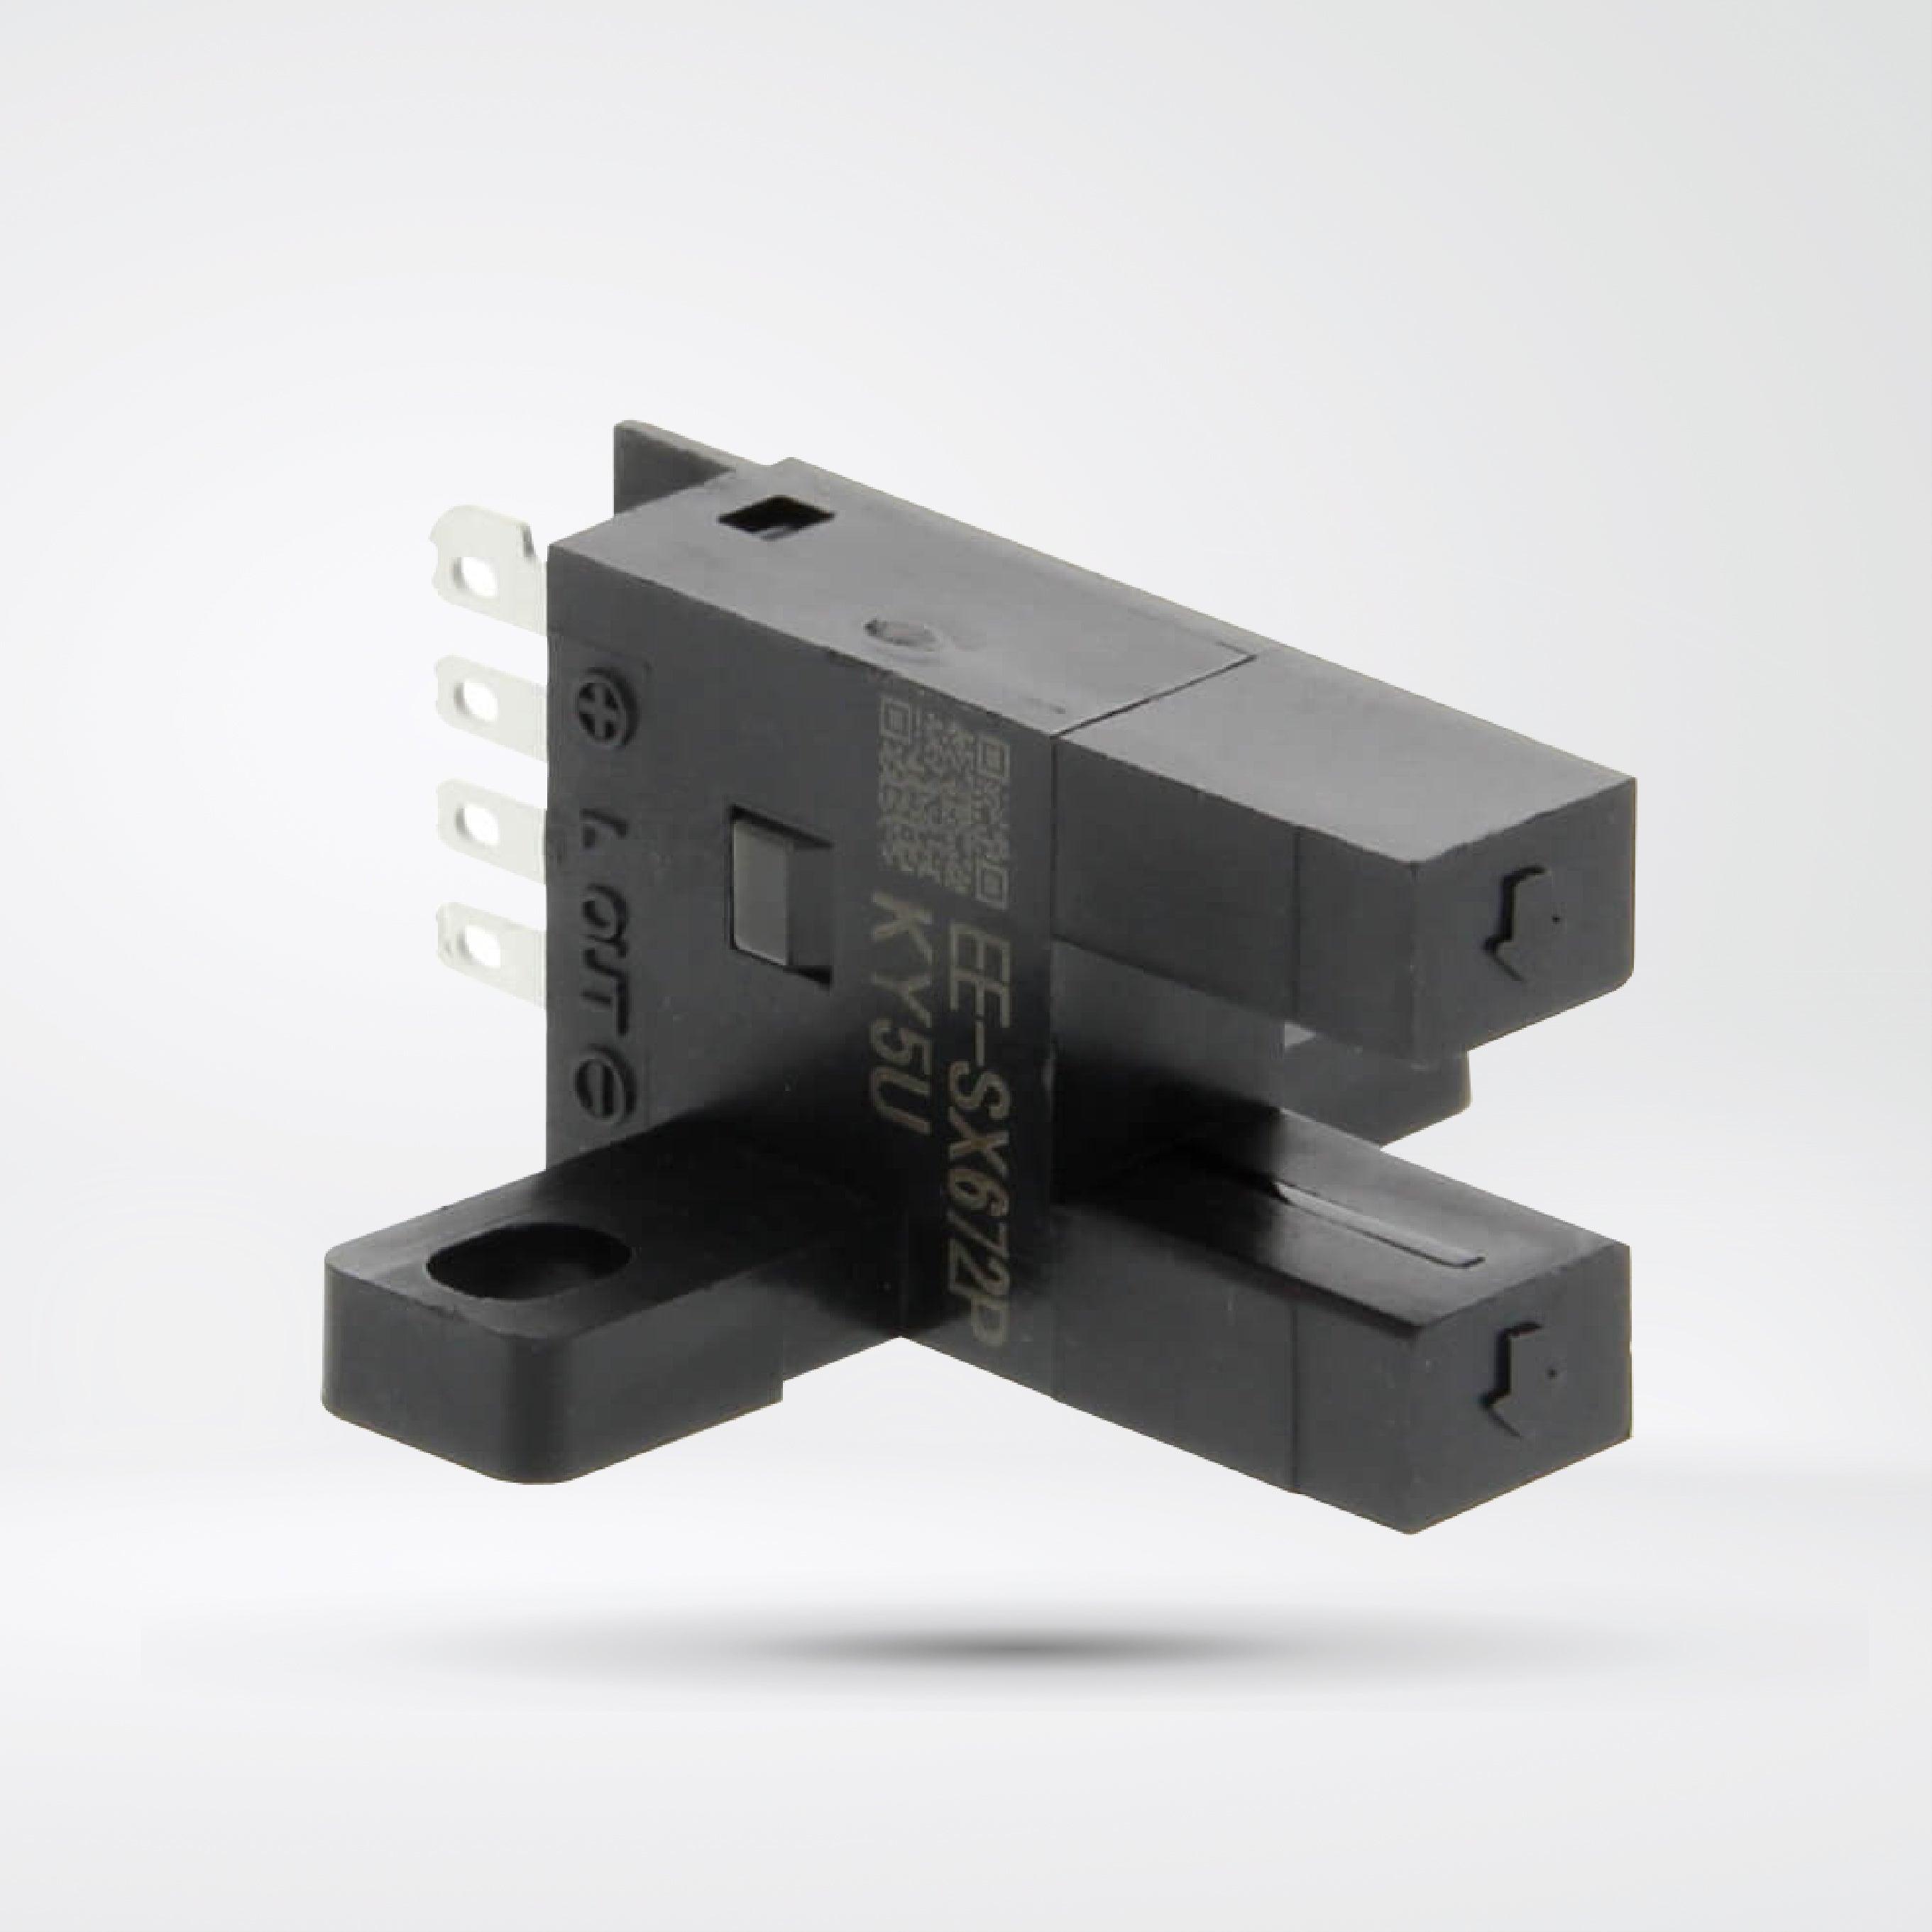 EE-SX672 Photo micro sensor, slot type, T-shaped, L-ON/D-ON selectable, NPN, connector - Riverplus